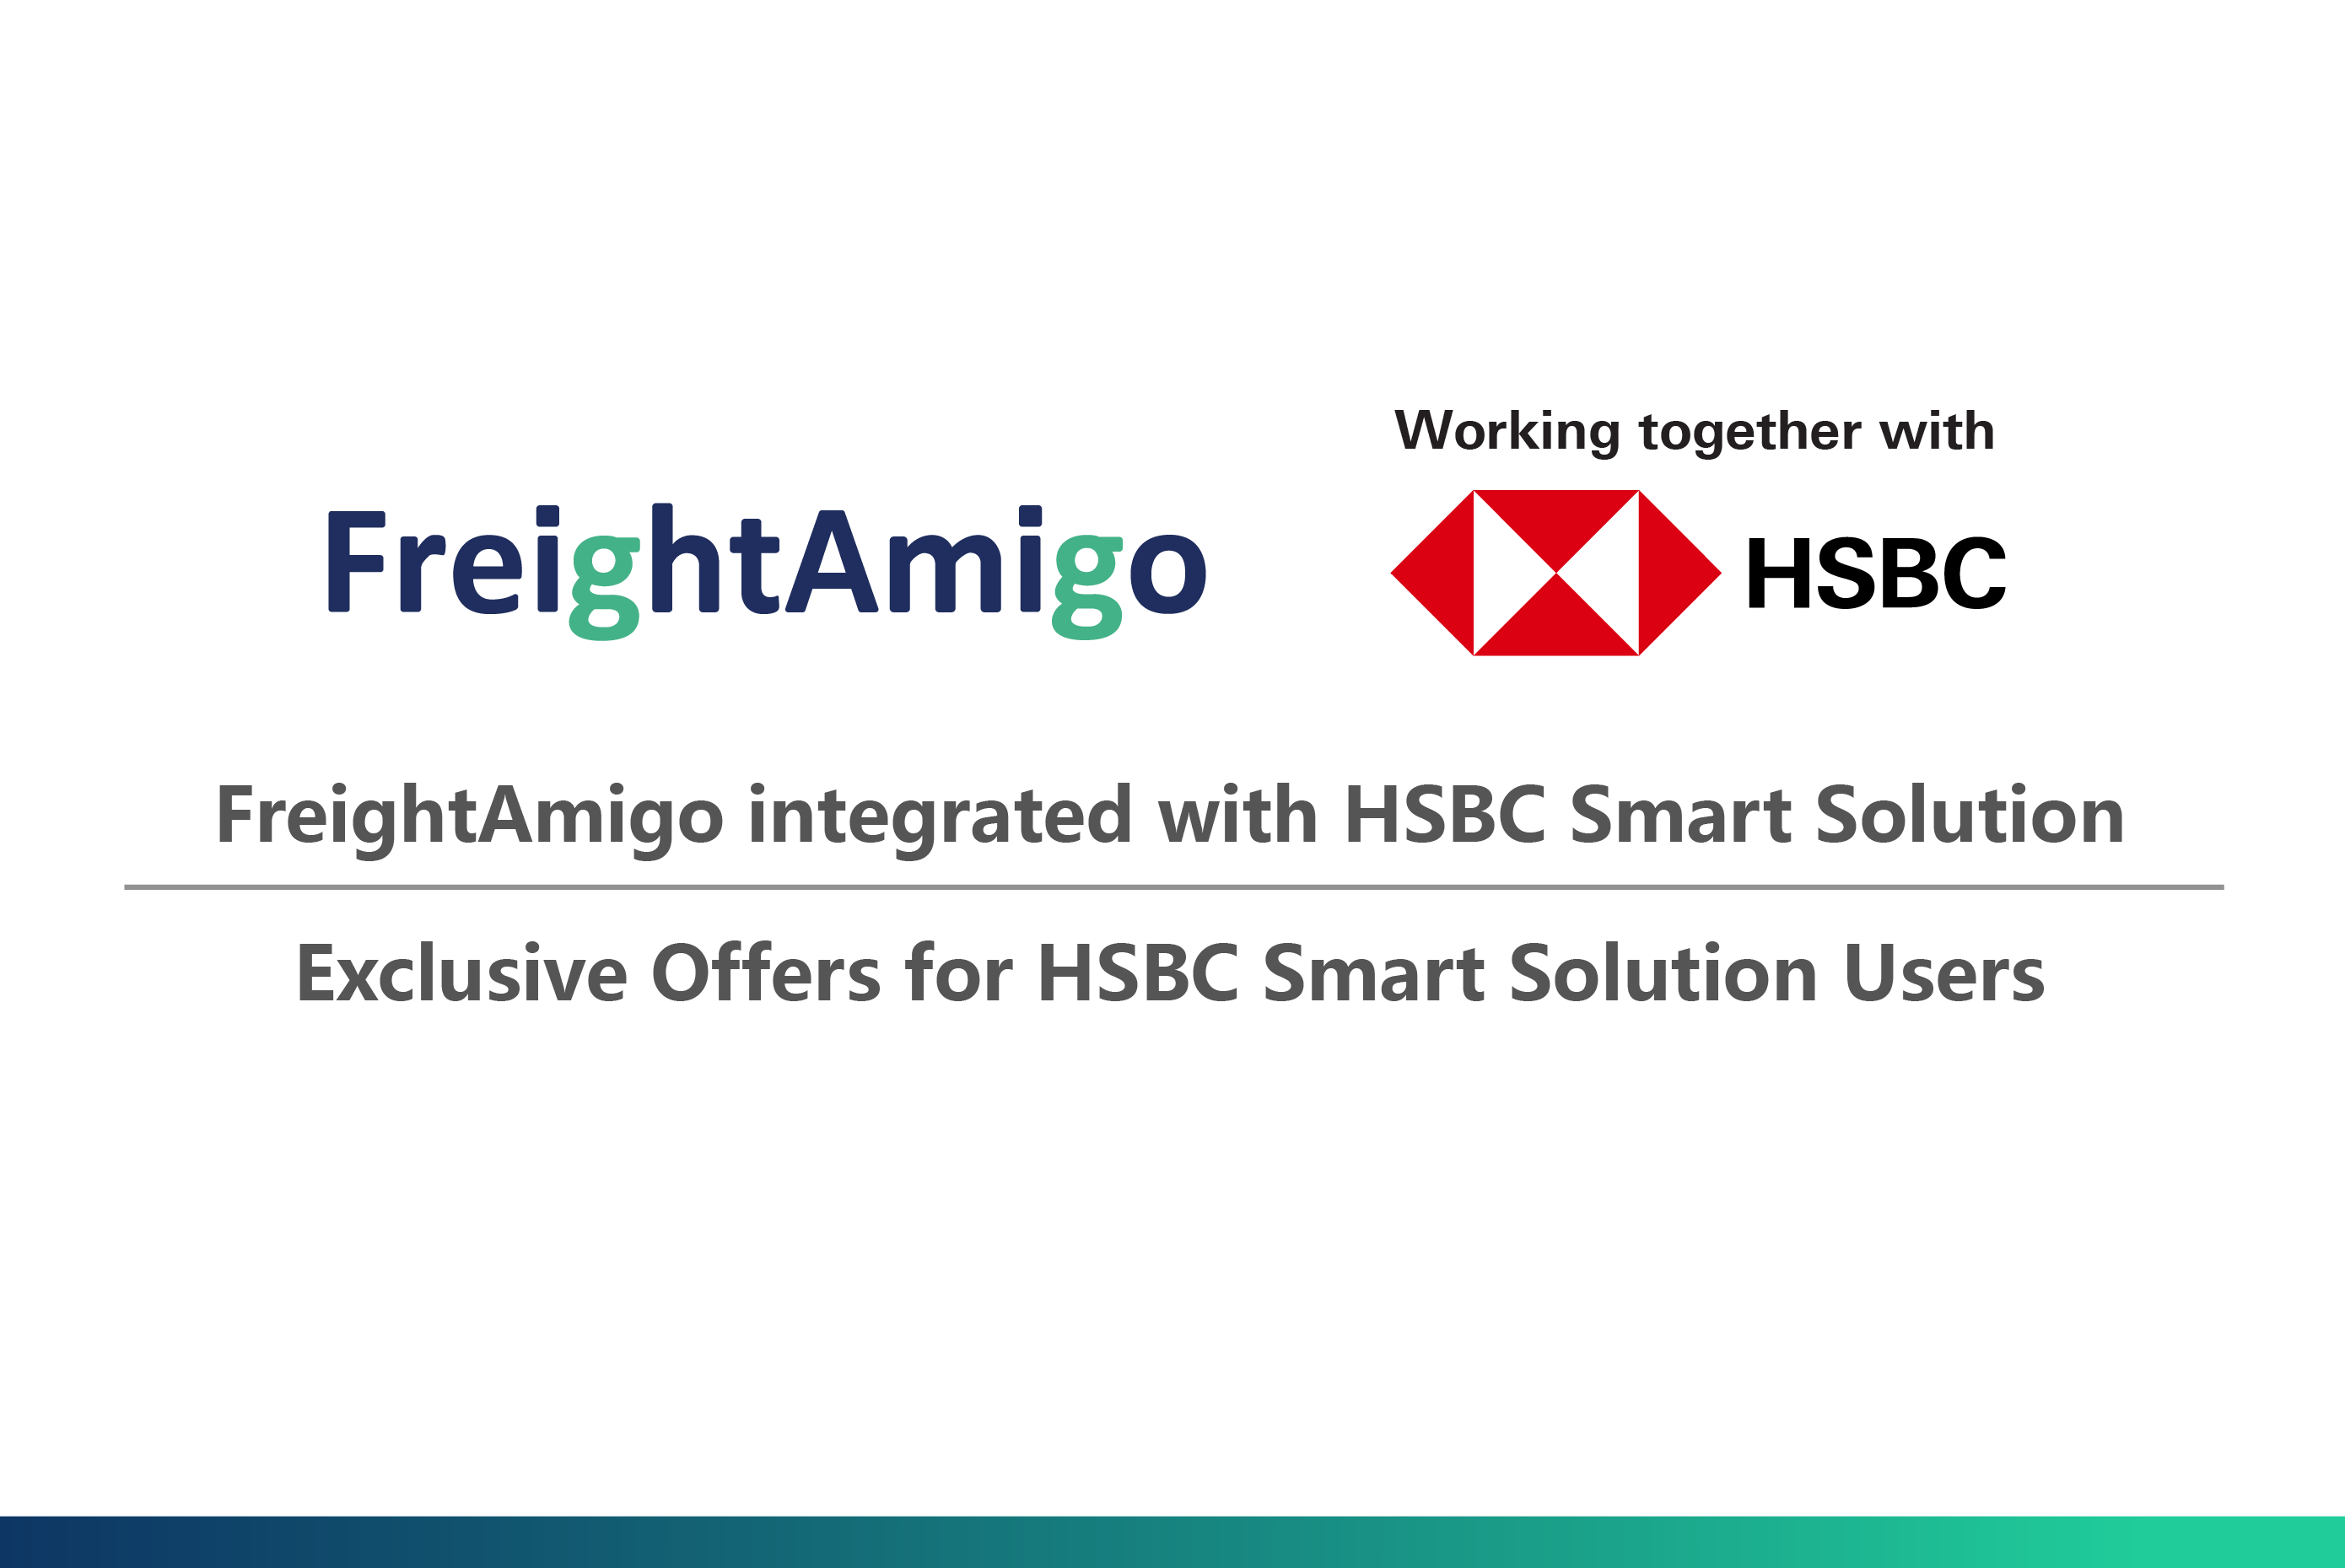 Over HKD40,000 Exclusive Freightage Offers for HSBC Smart Solution Users